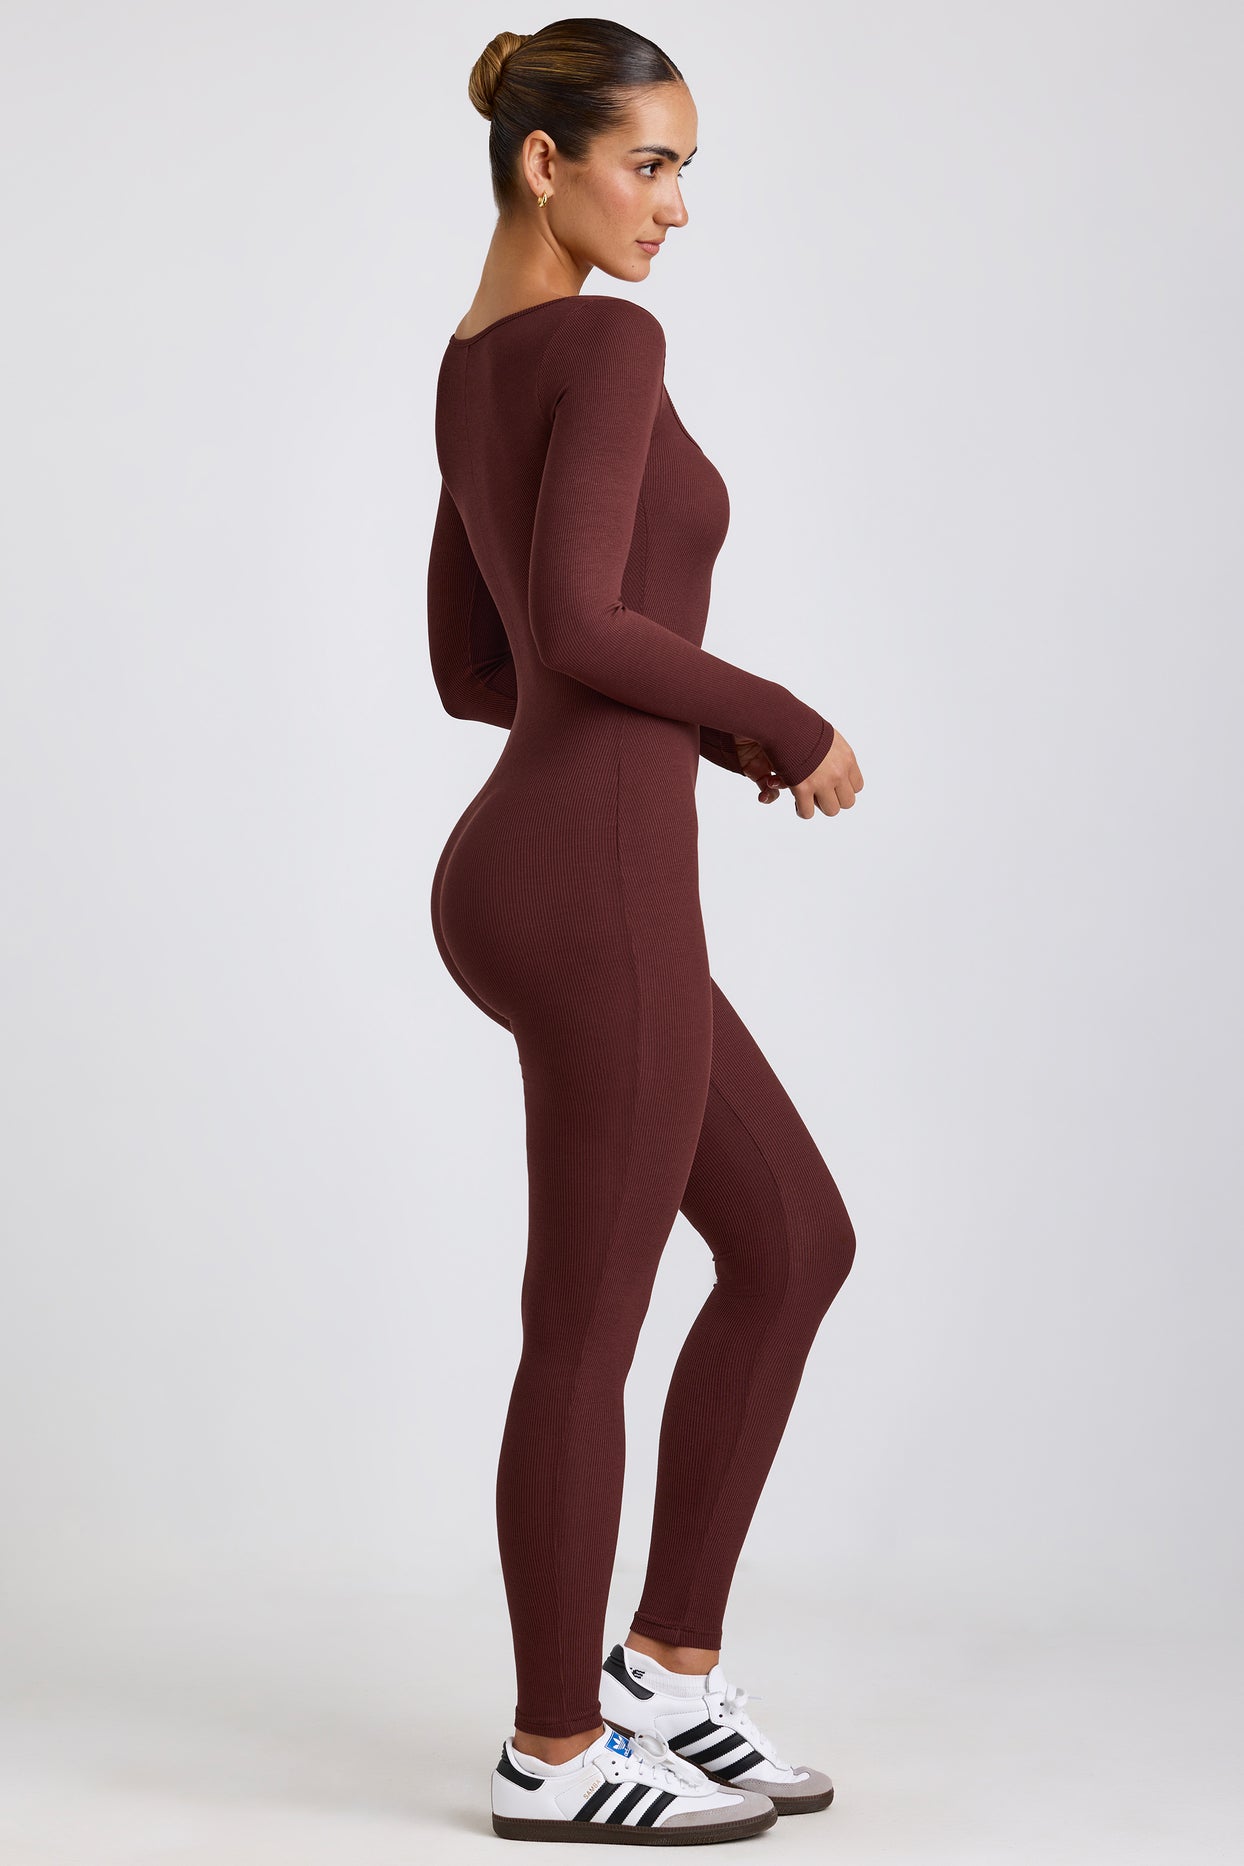 Ribbed Modal Long Sleeve Jumpsuit in Espresso